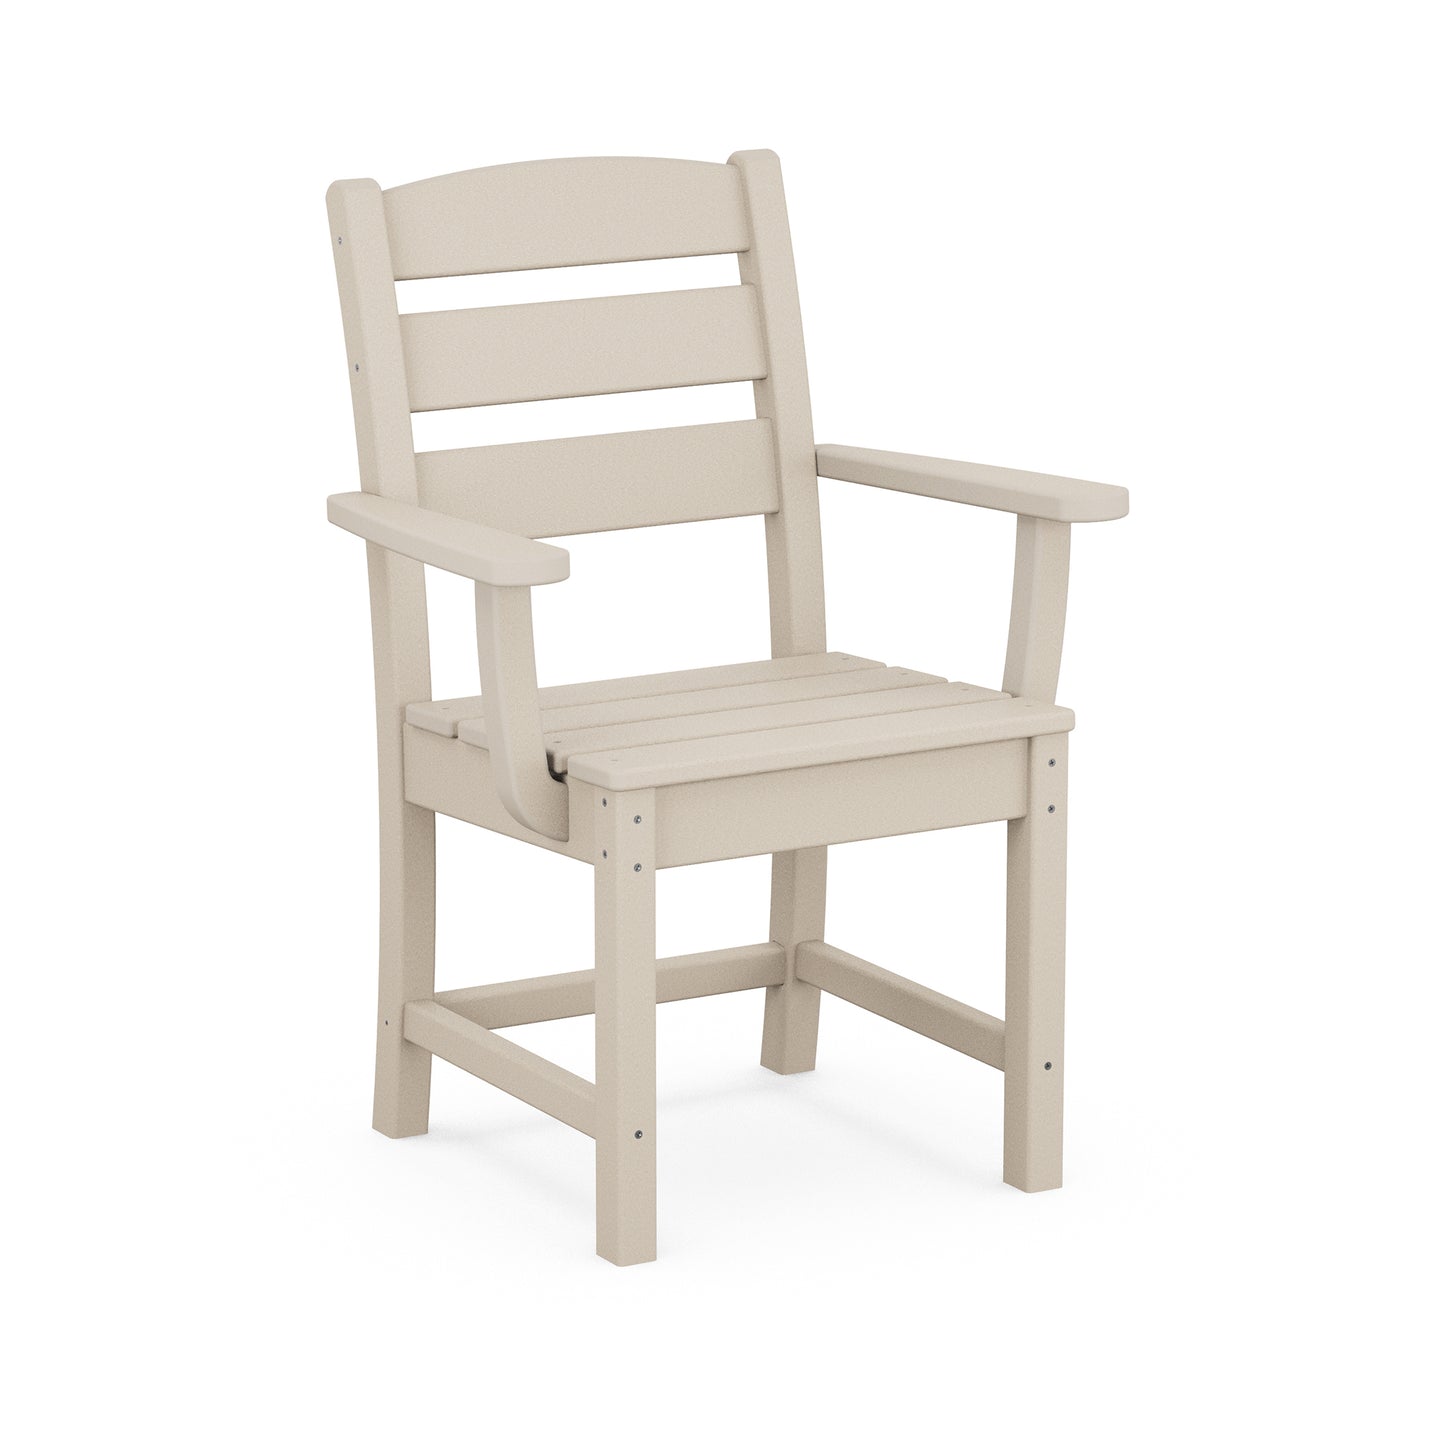 A beige POLYWOOD Lakeside Dining Arm Chair with a straight back and armrests, made from POLYWOOD® lumber, displayed on a plain white background.